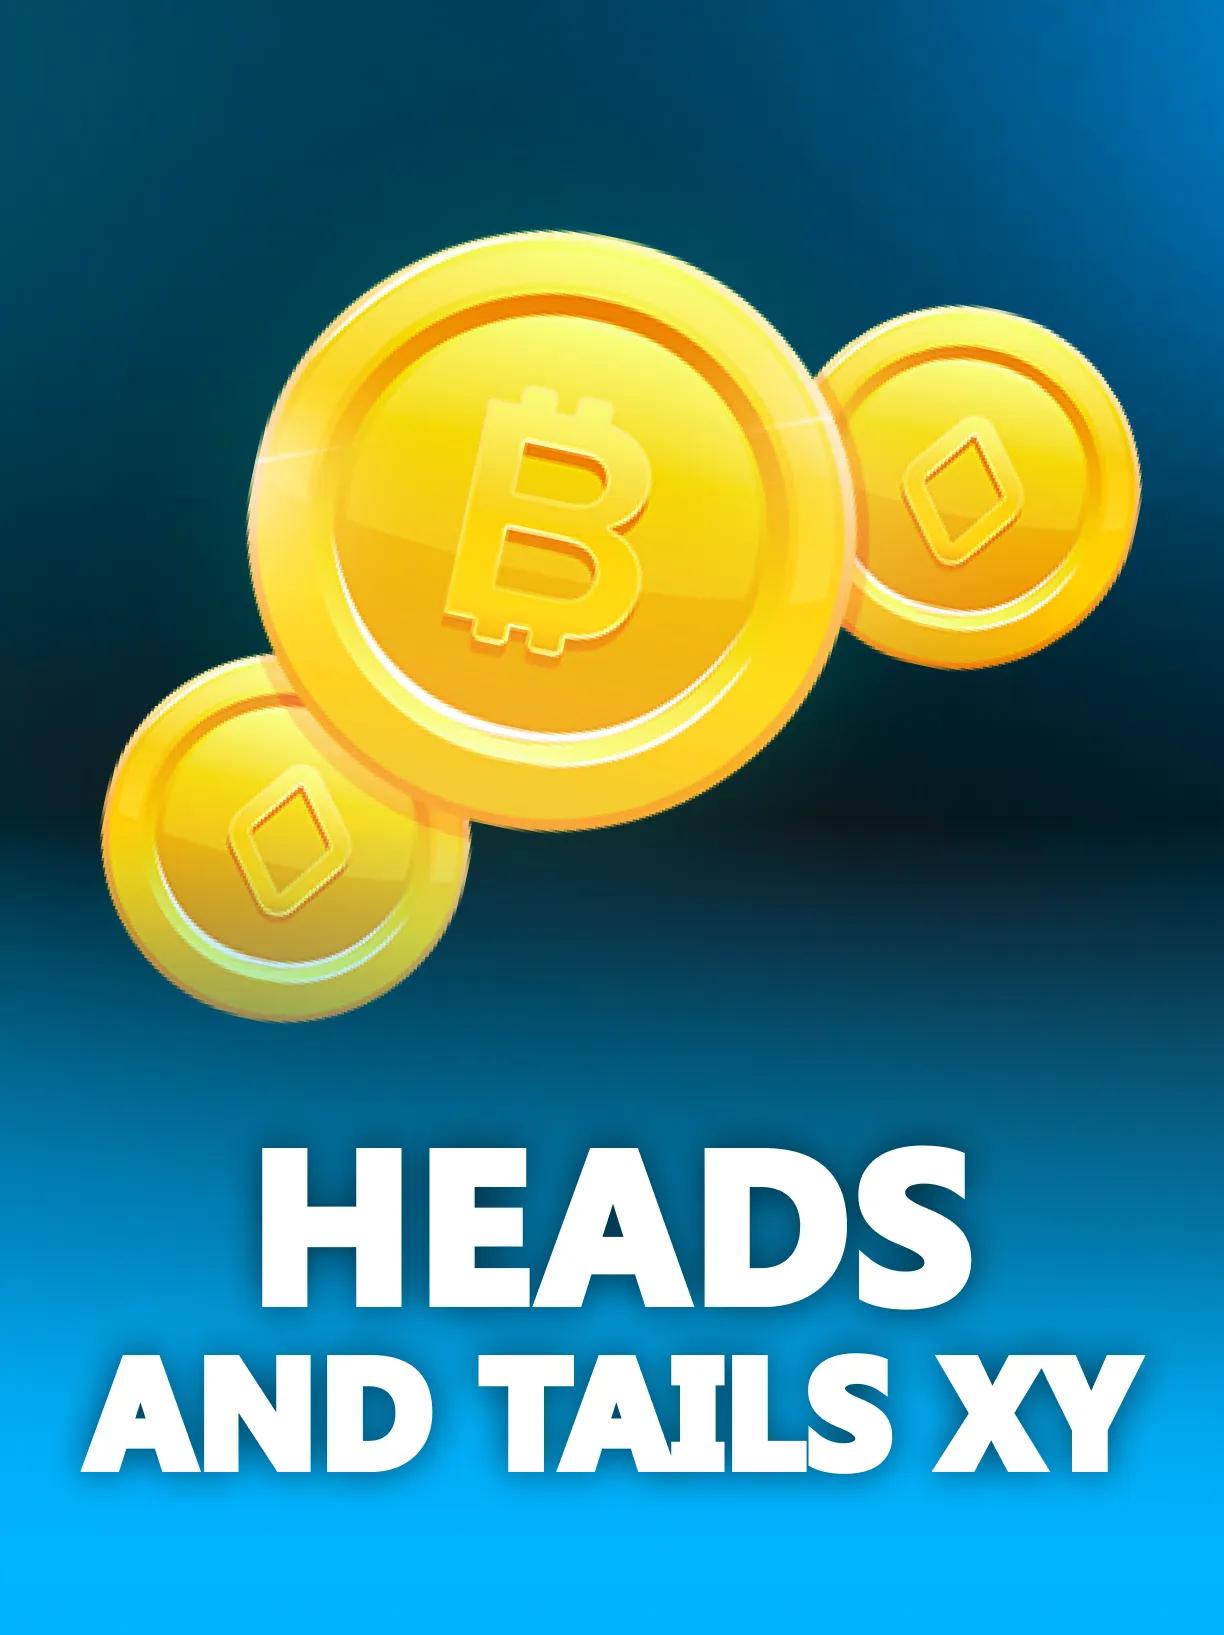 Heads_and_Tails_XY_square.webp